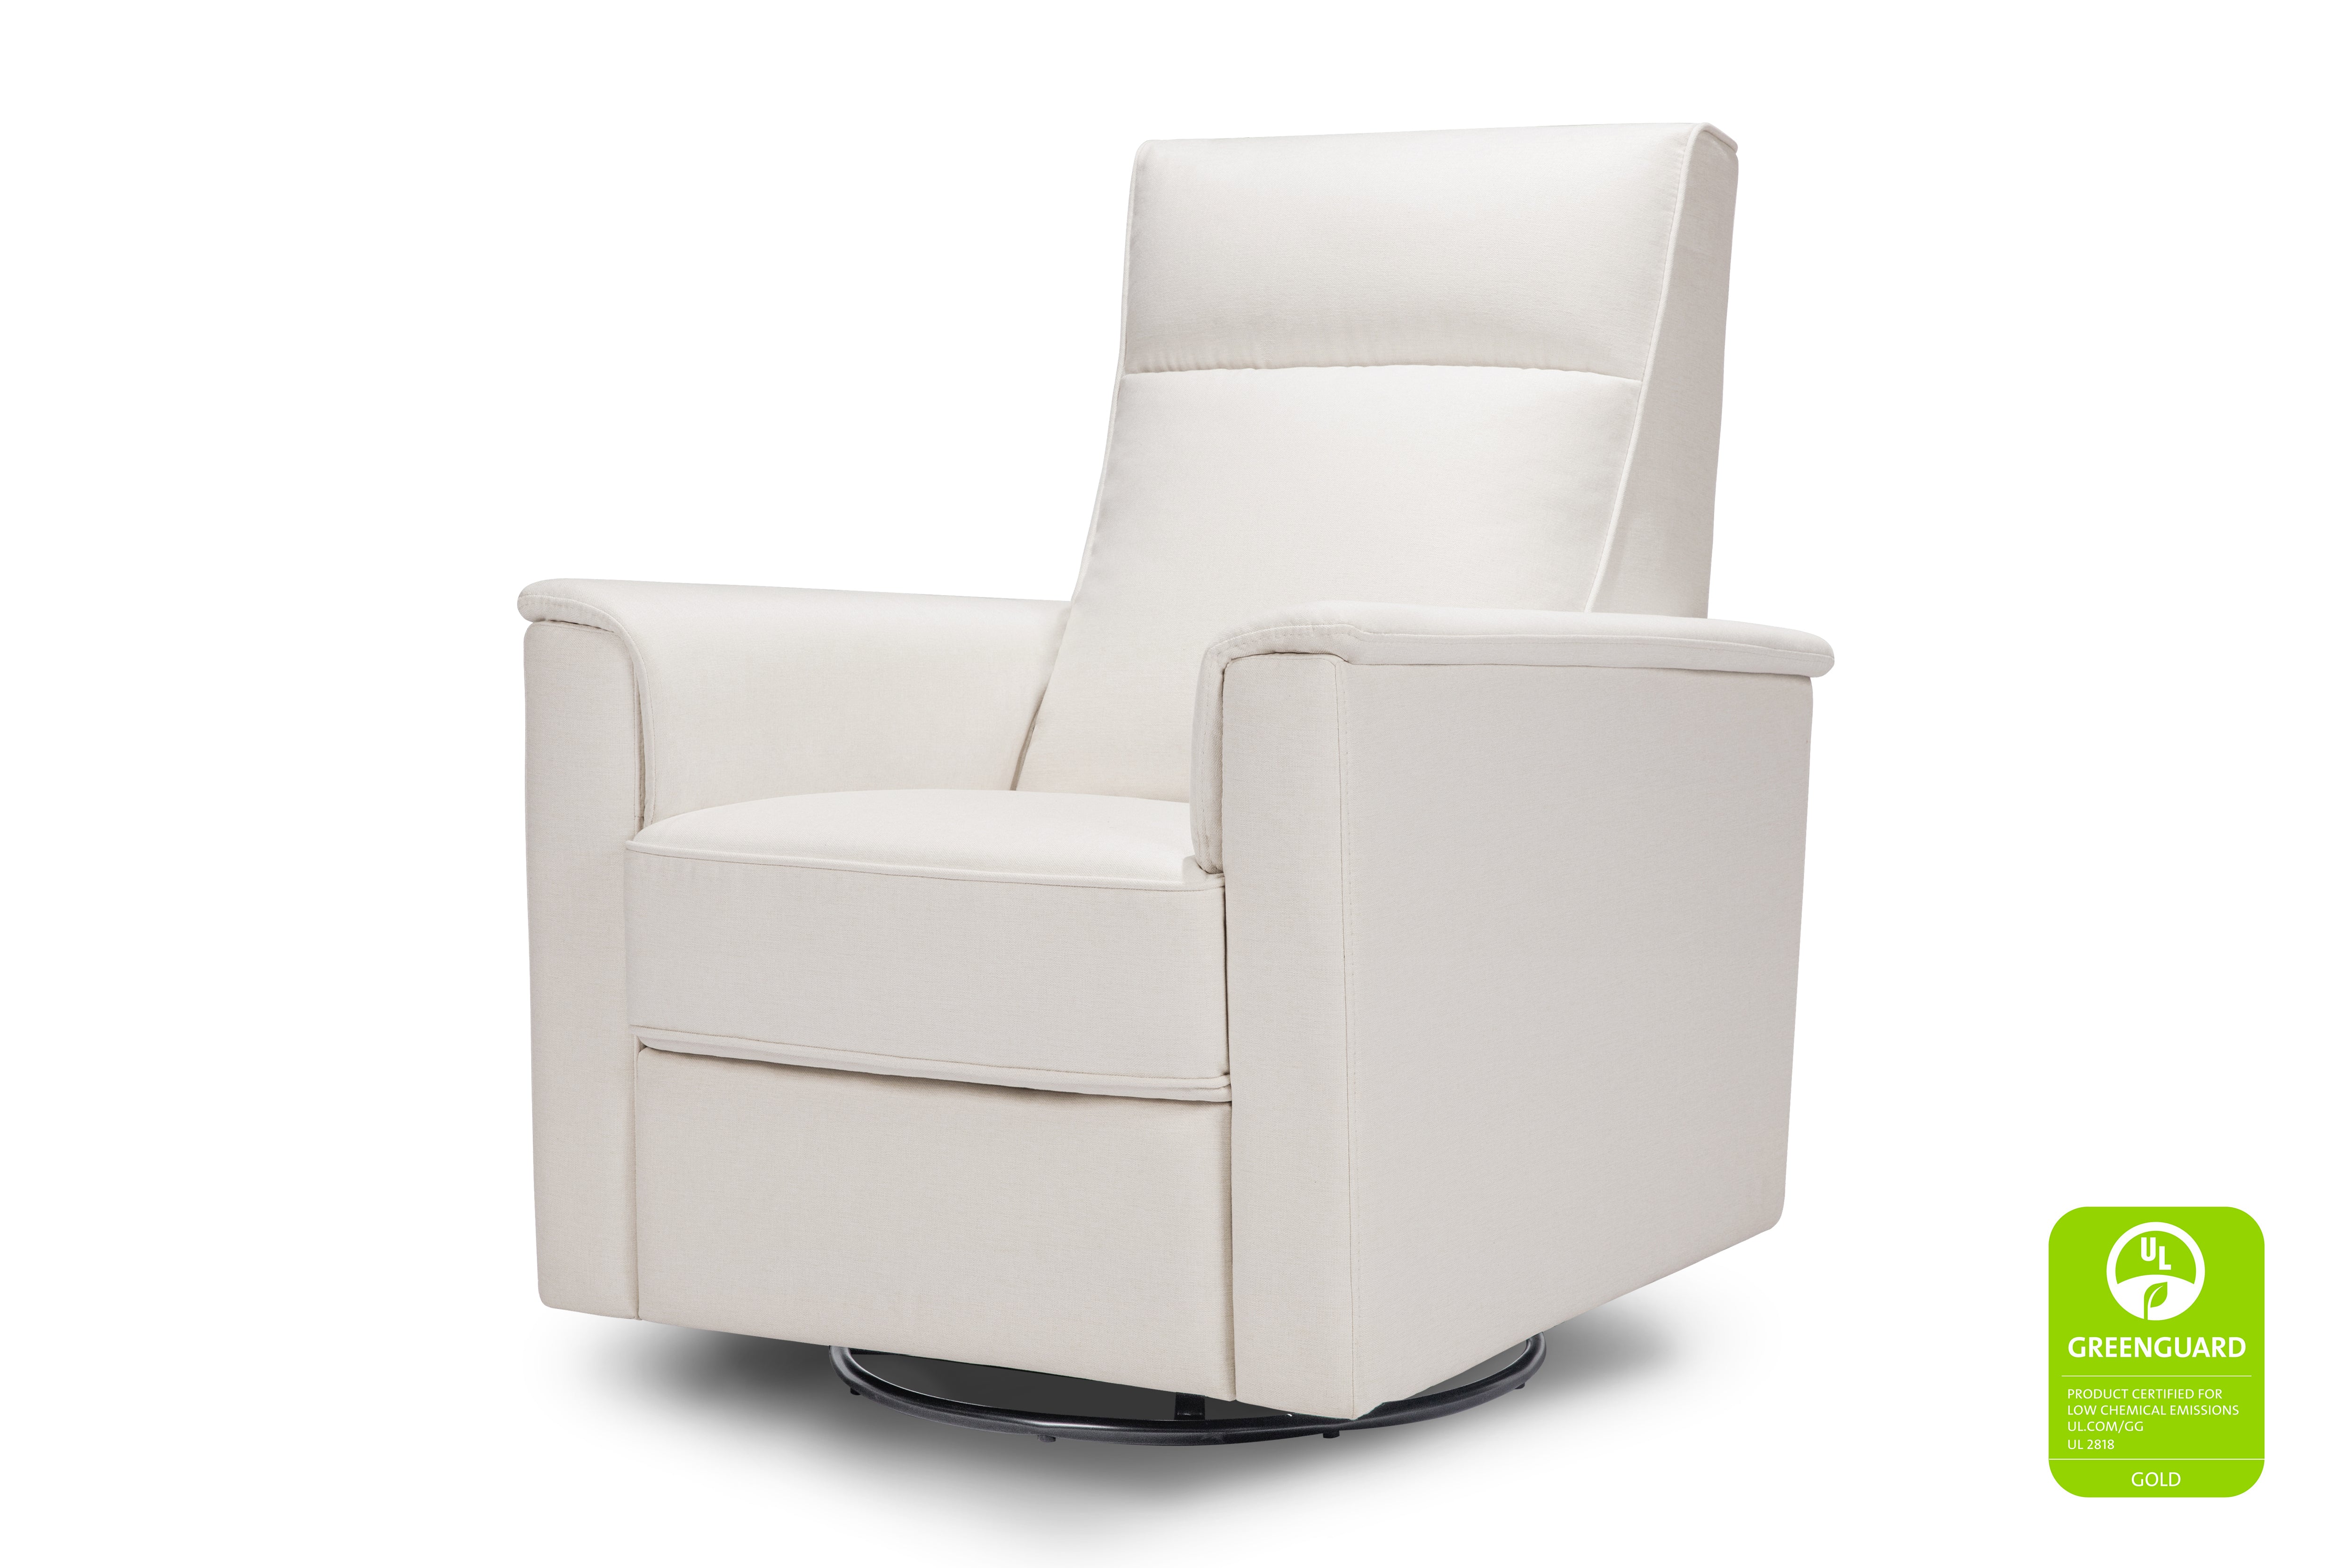 Willa Recliner in Eco-Performance Fabric - Twinkle Twinkle Little One